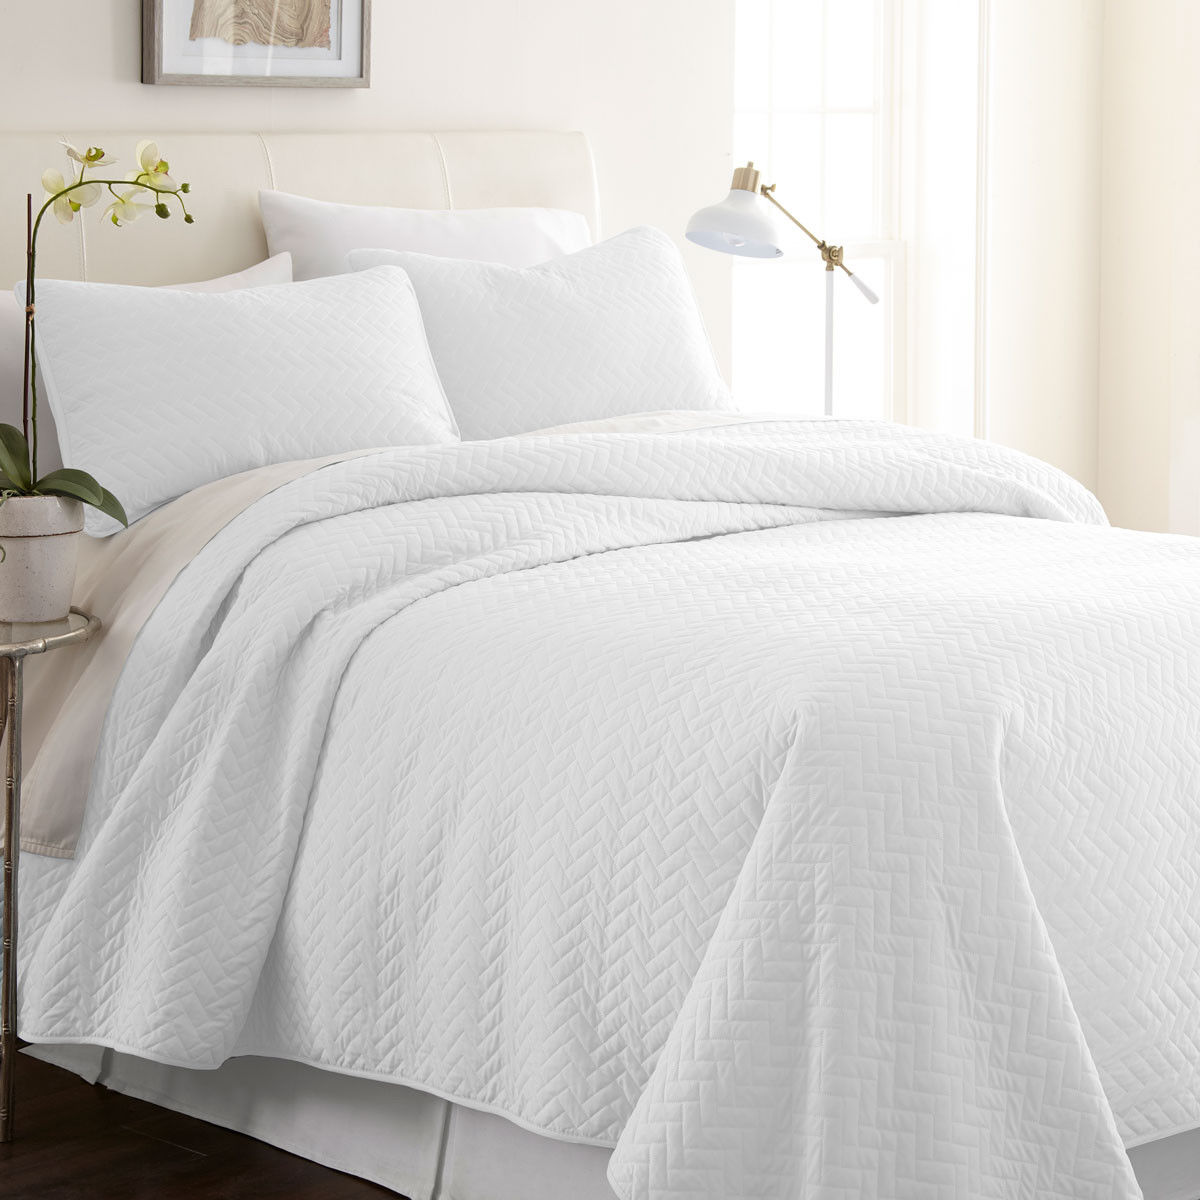 Which colors does the 3-Piece Herring Quilted Coverlet Set come in?